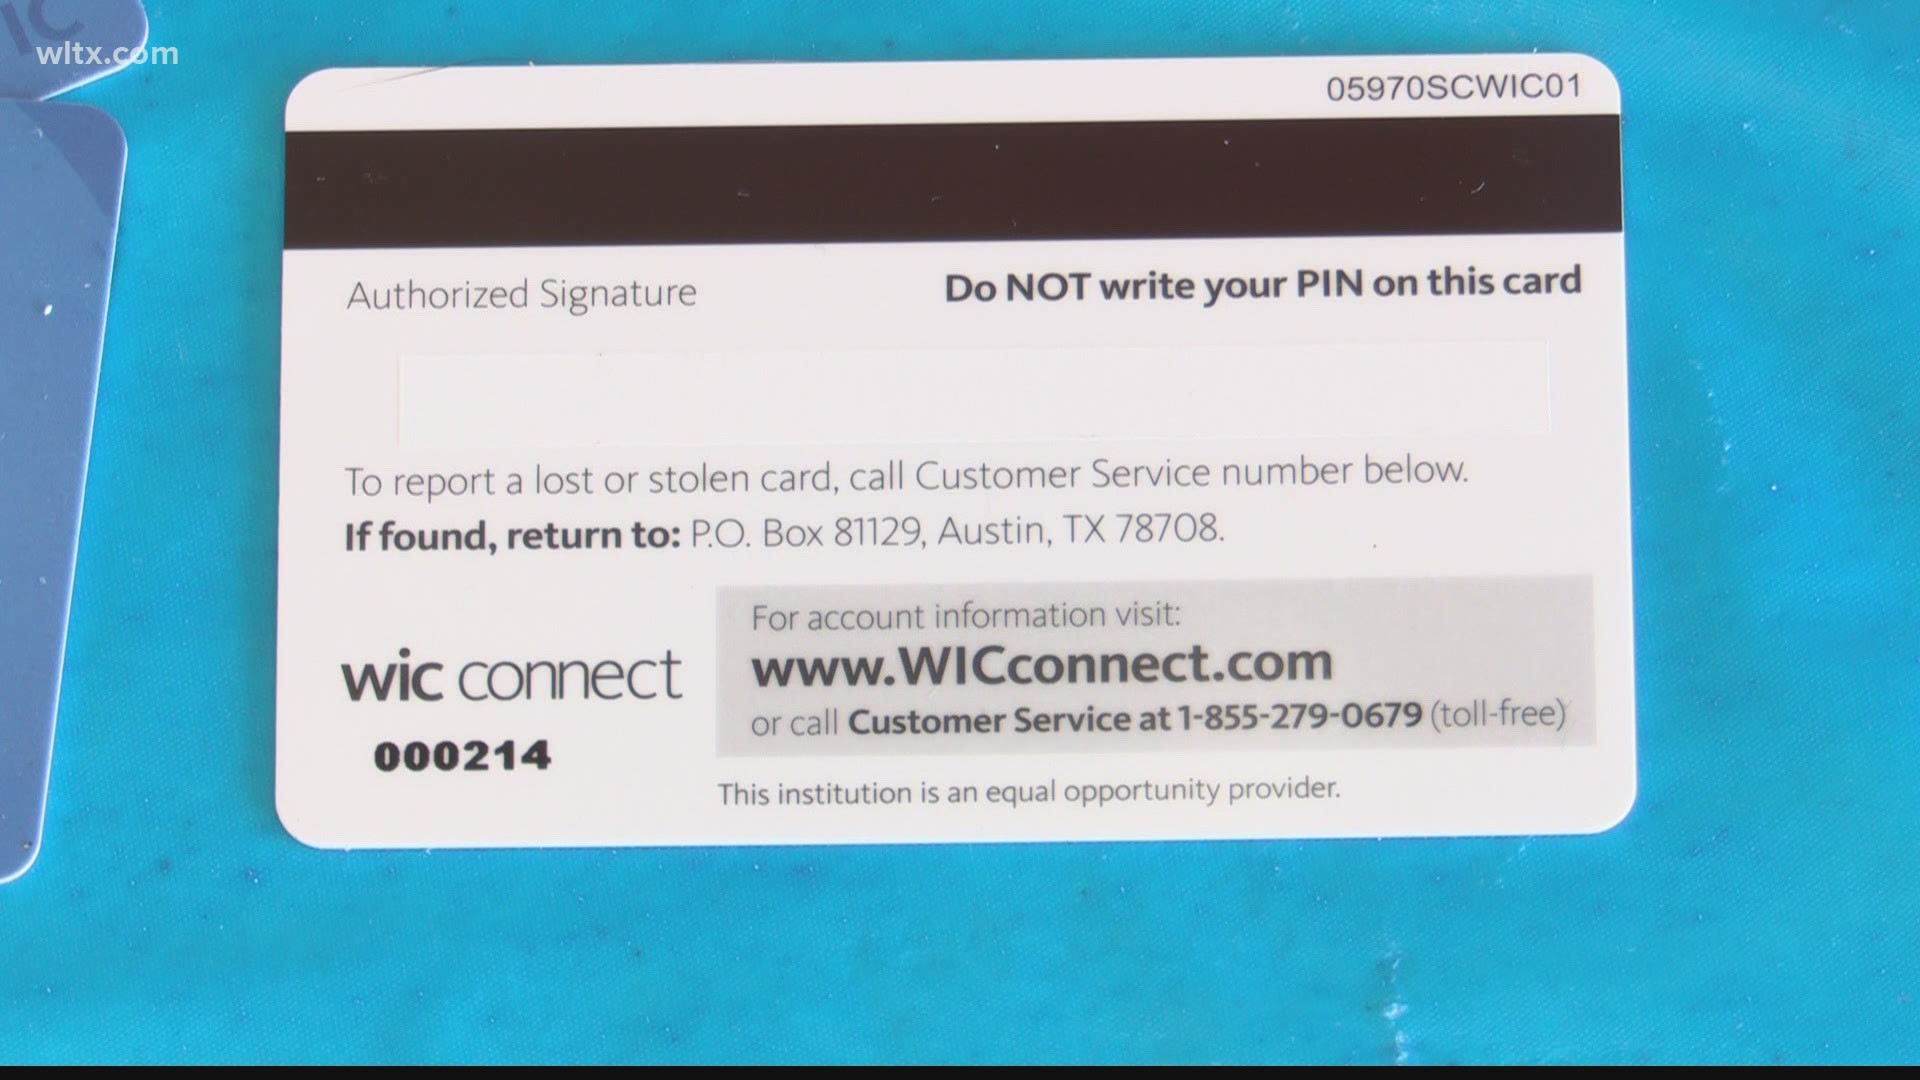 wic connect